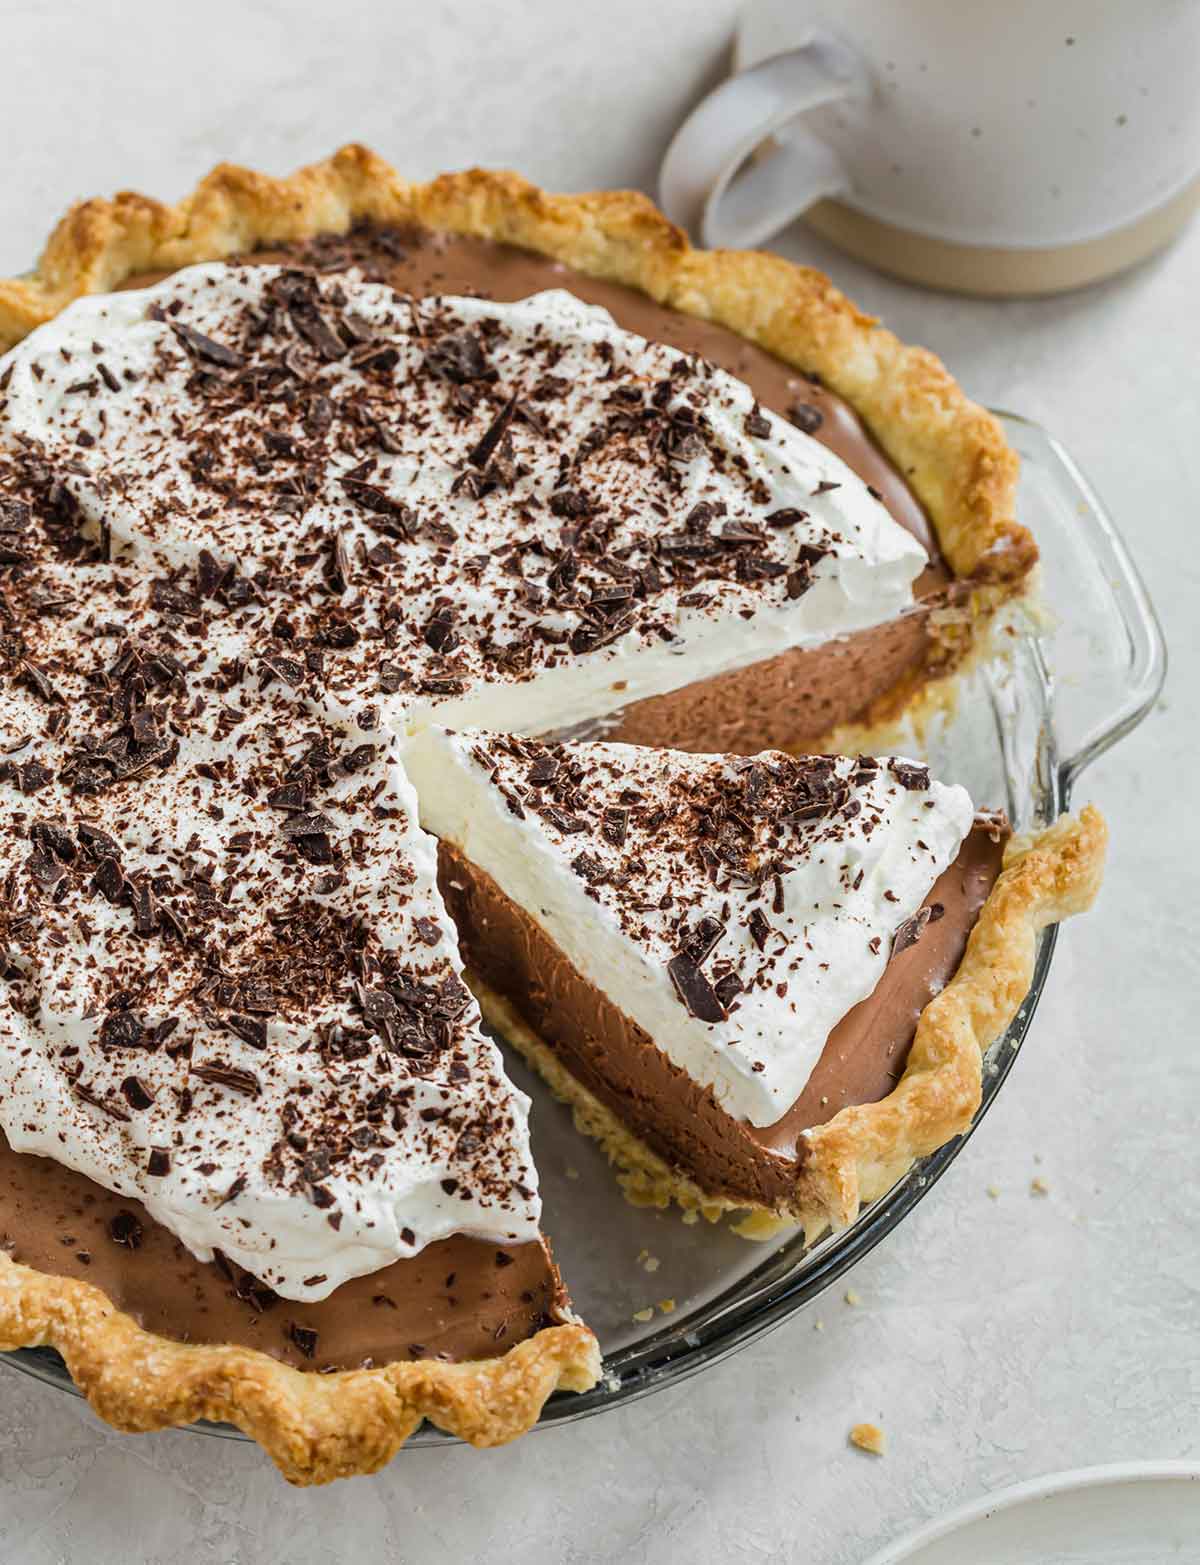 Overhead photo of French silk pie in glass pie plate with one slice cut away from rest of pie but still in the plate.